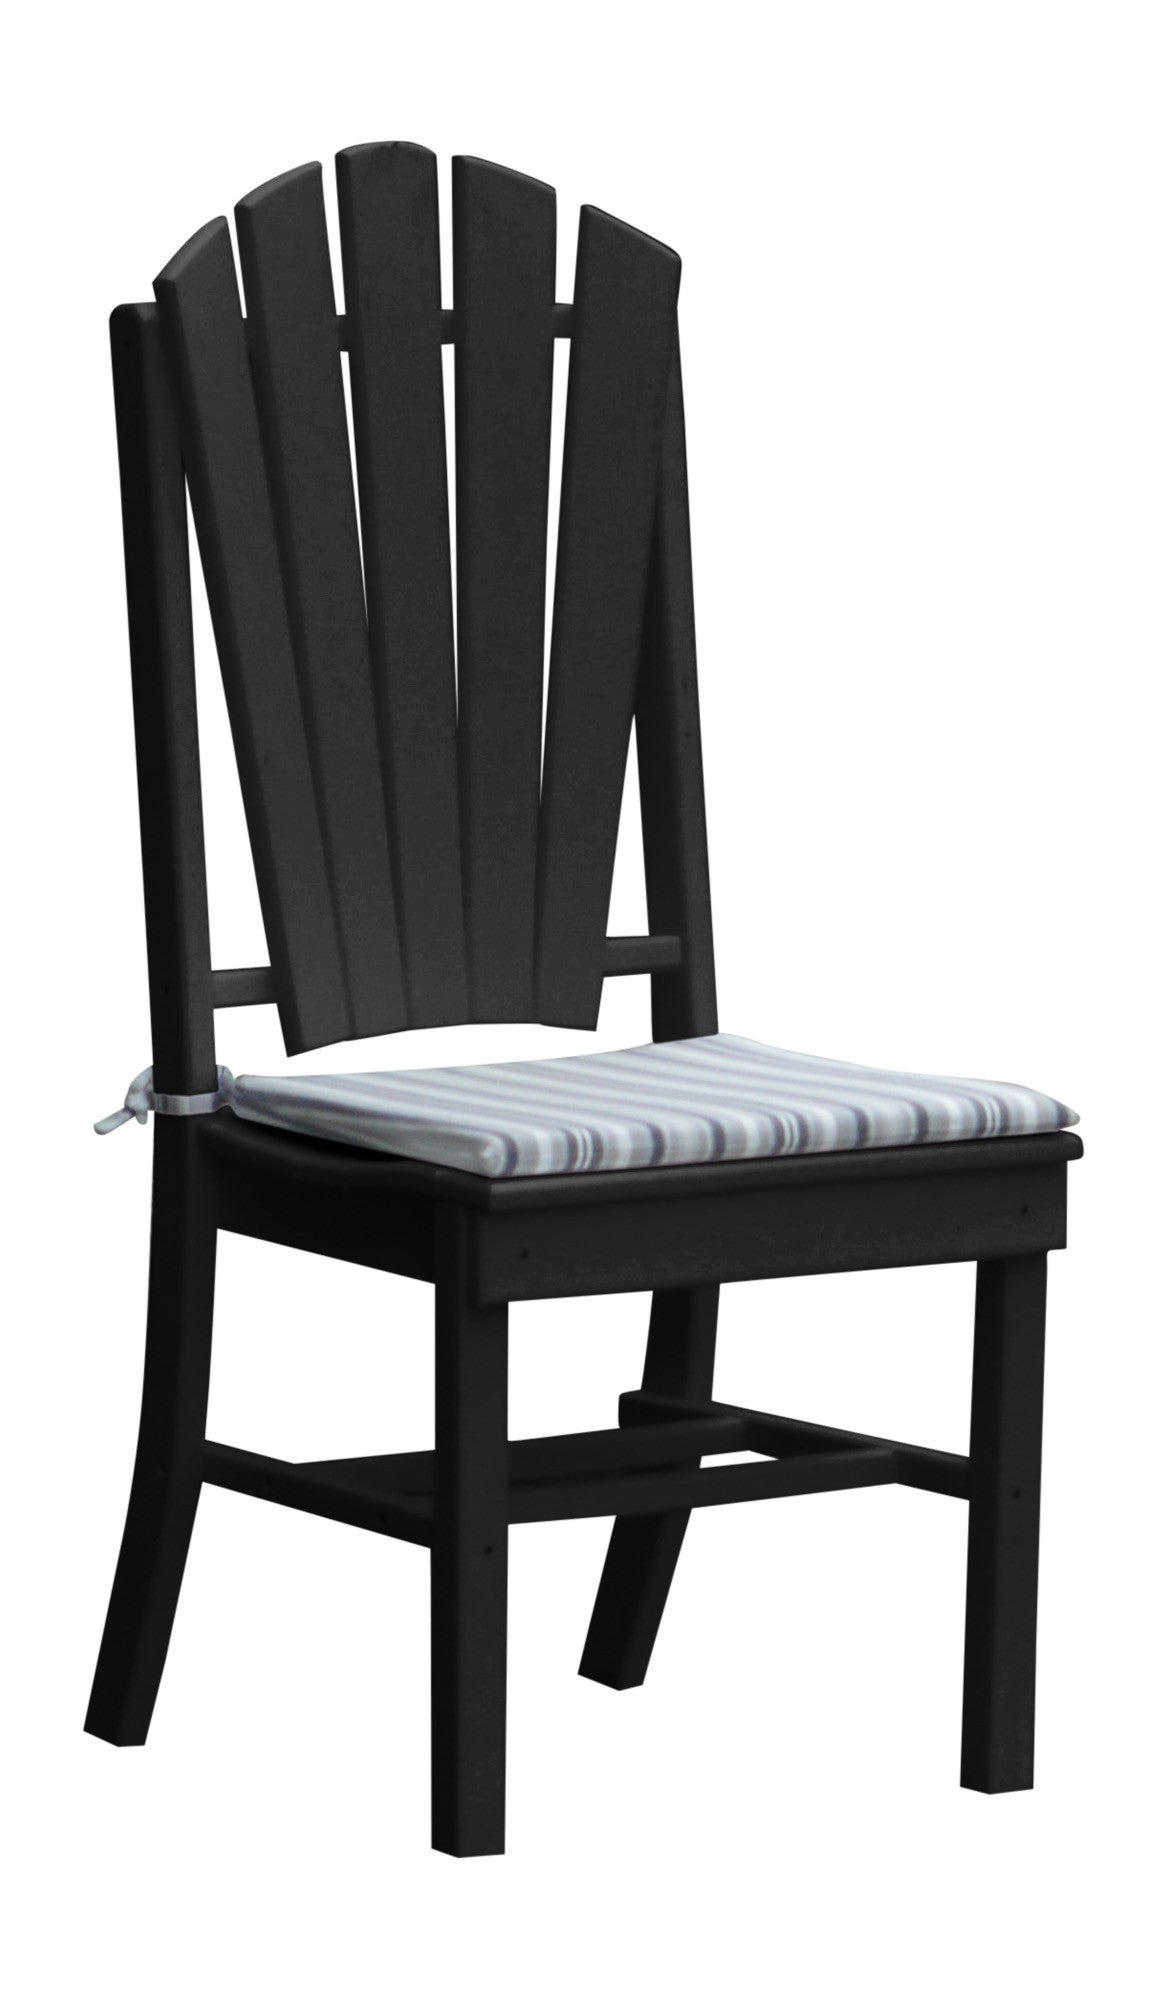 A&L Furniture Company Recycled Plastic Adirondack Dining Chair - Black